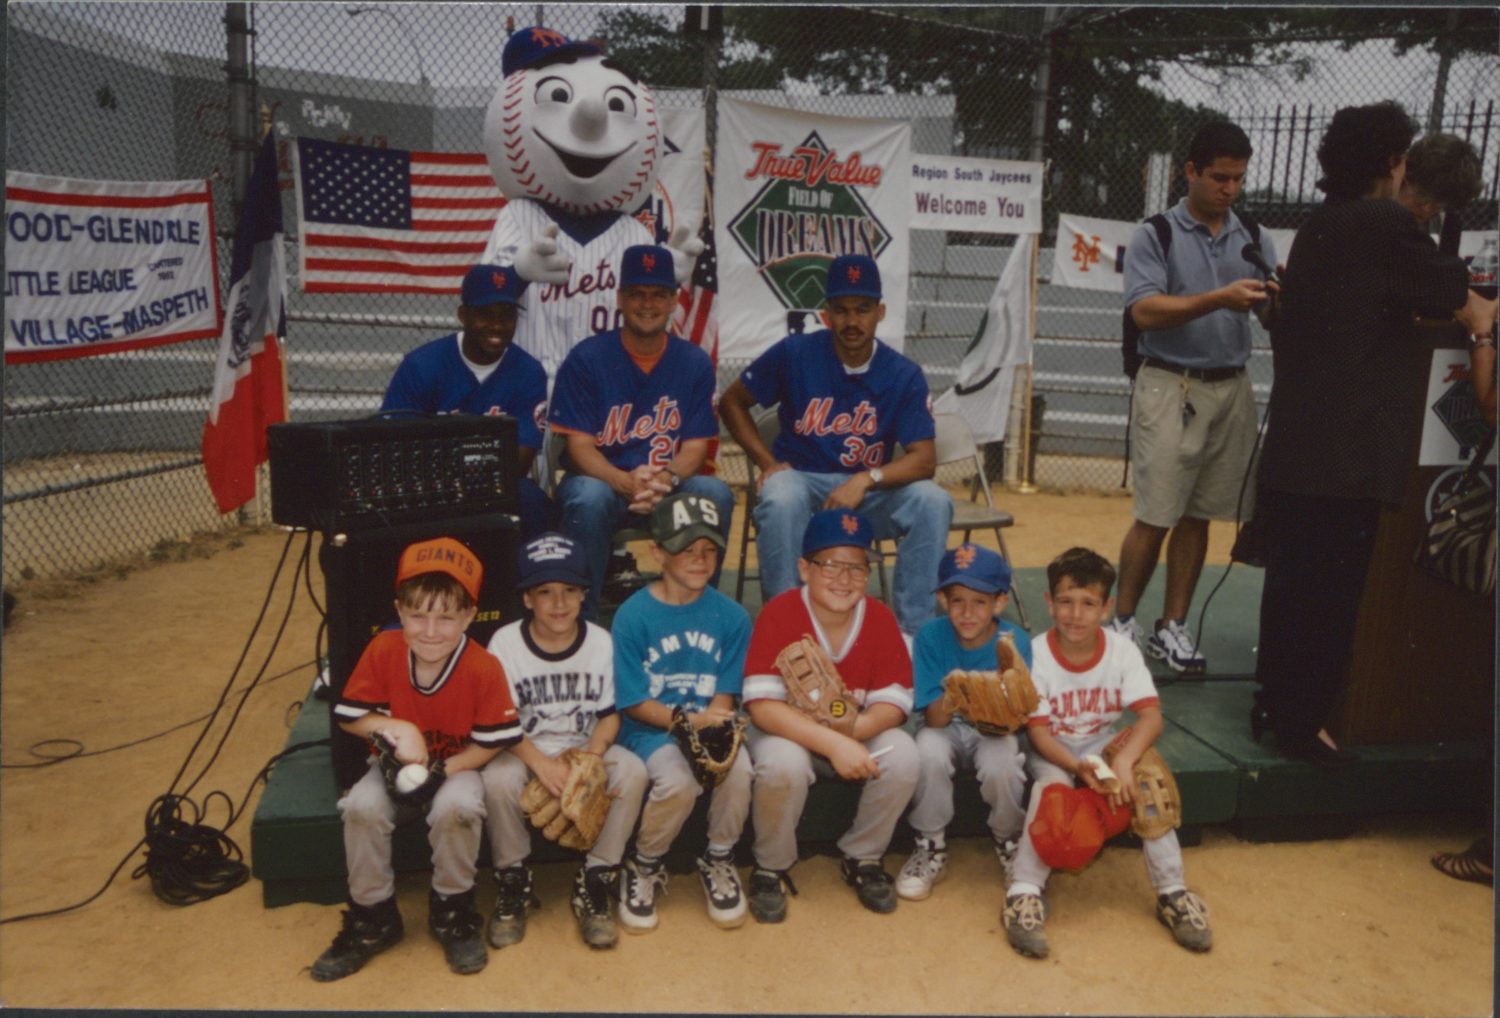 Alberto Castillo, Alex Ochoa and Bruce Benedict Pose With Mr. Met and a Group of 6 Young Fans